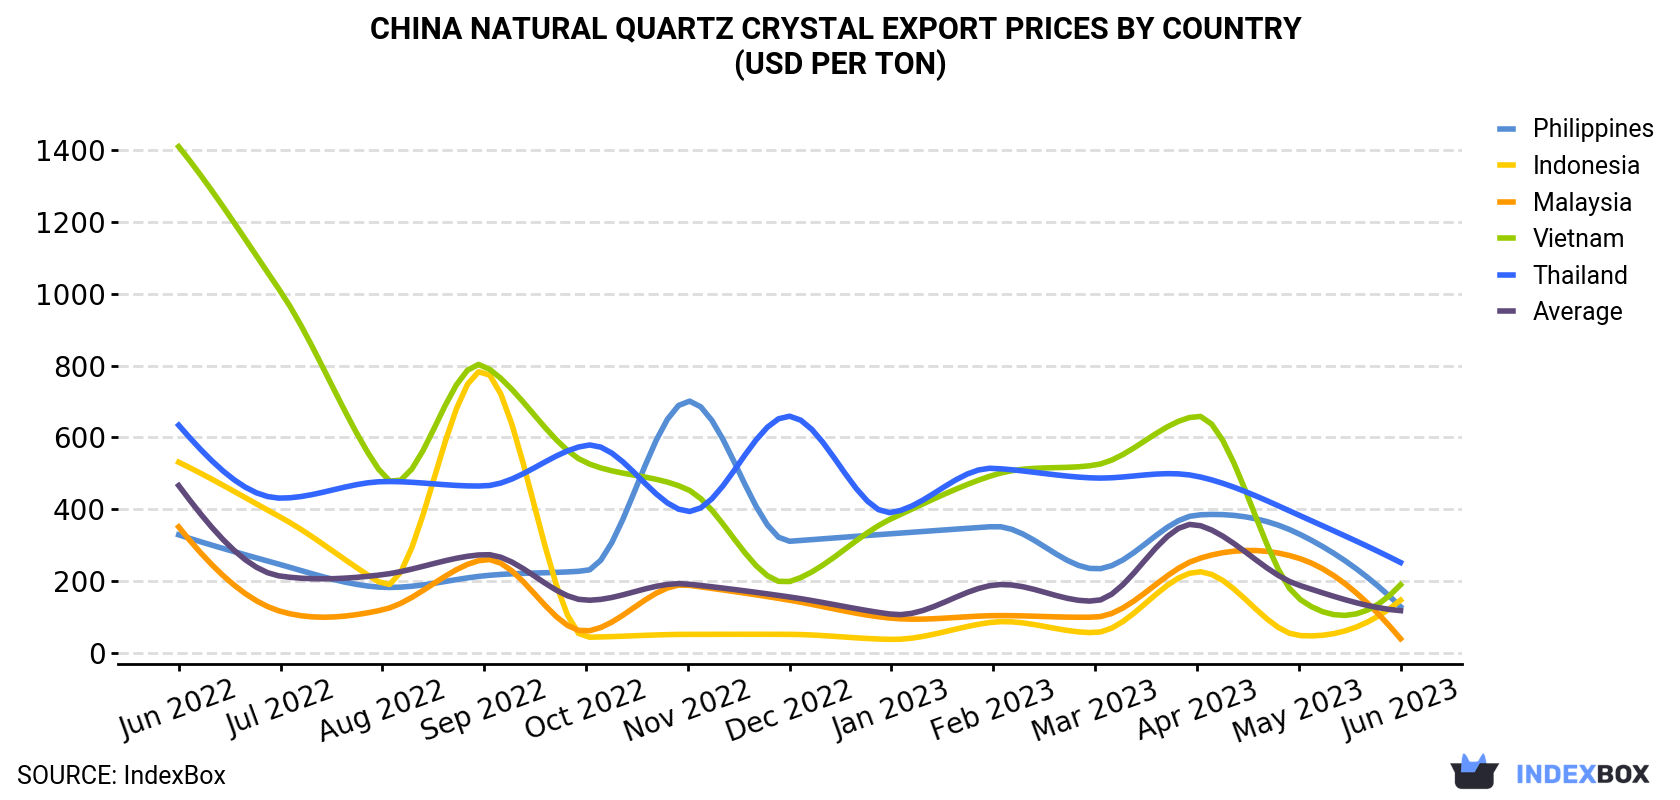 China Natural Quartz Crystal Export Prices By Country (USD Per Ton)